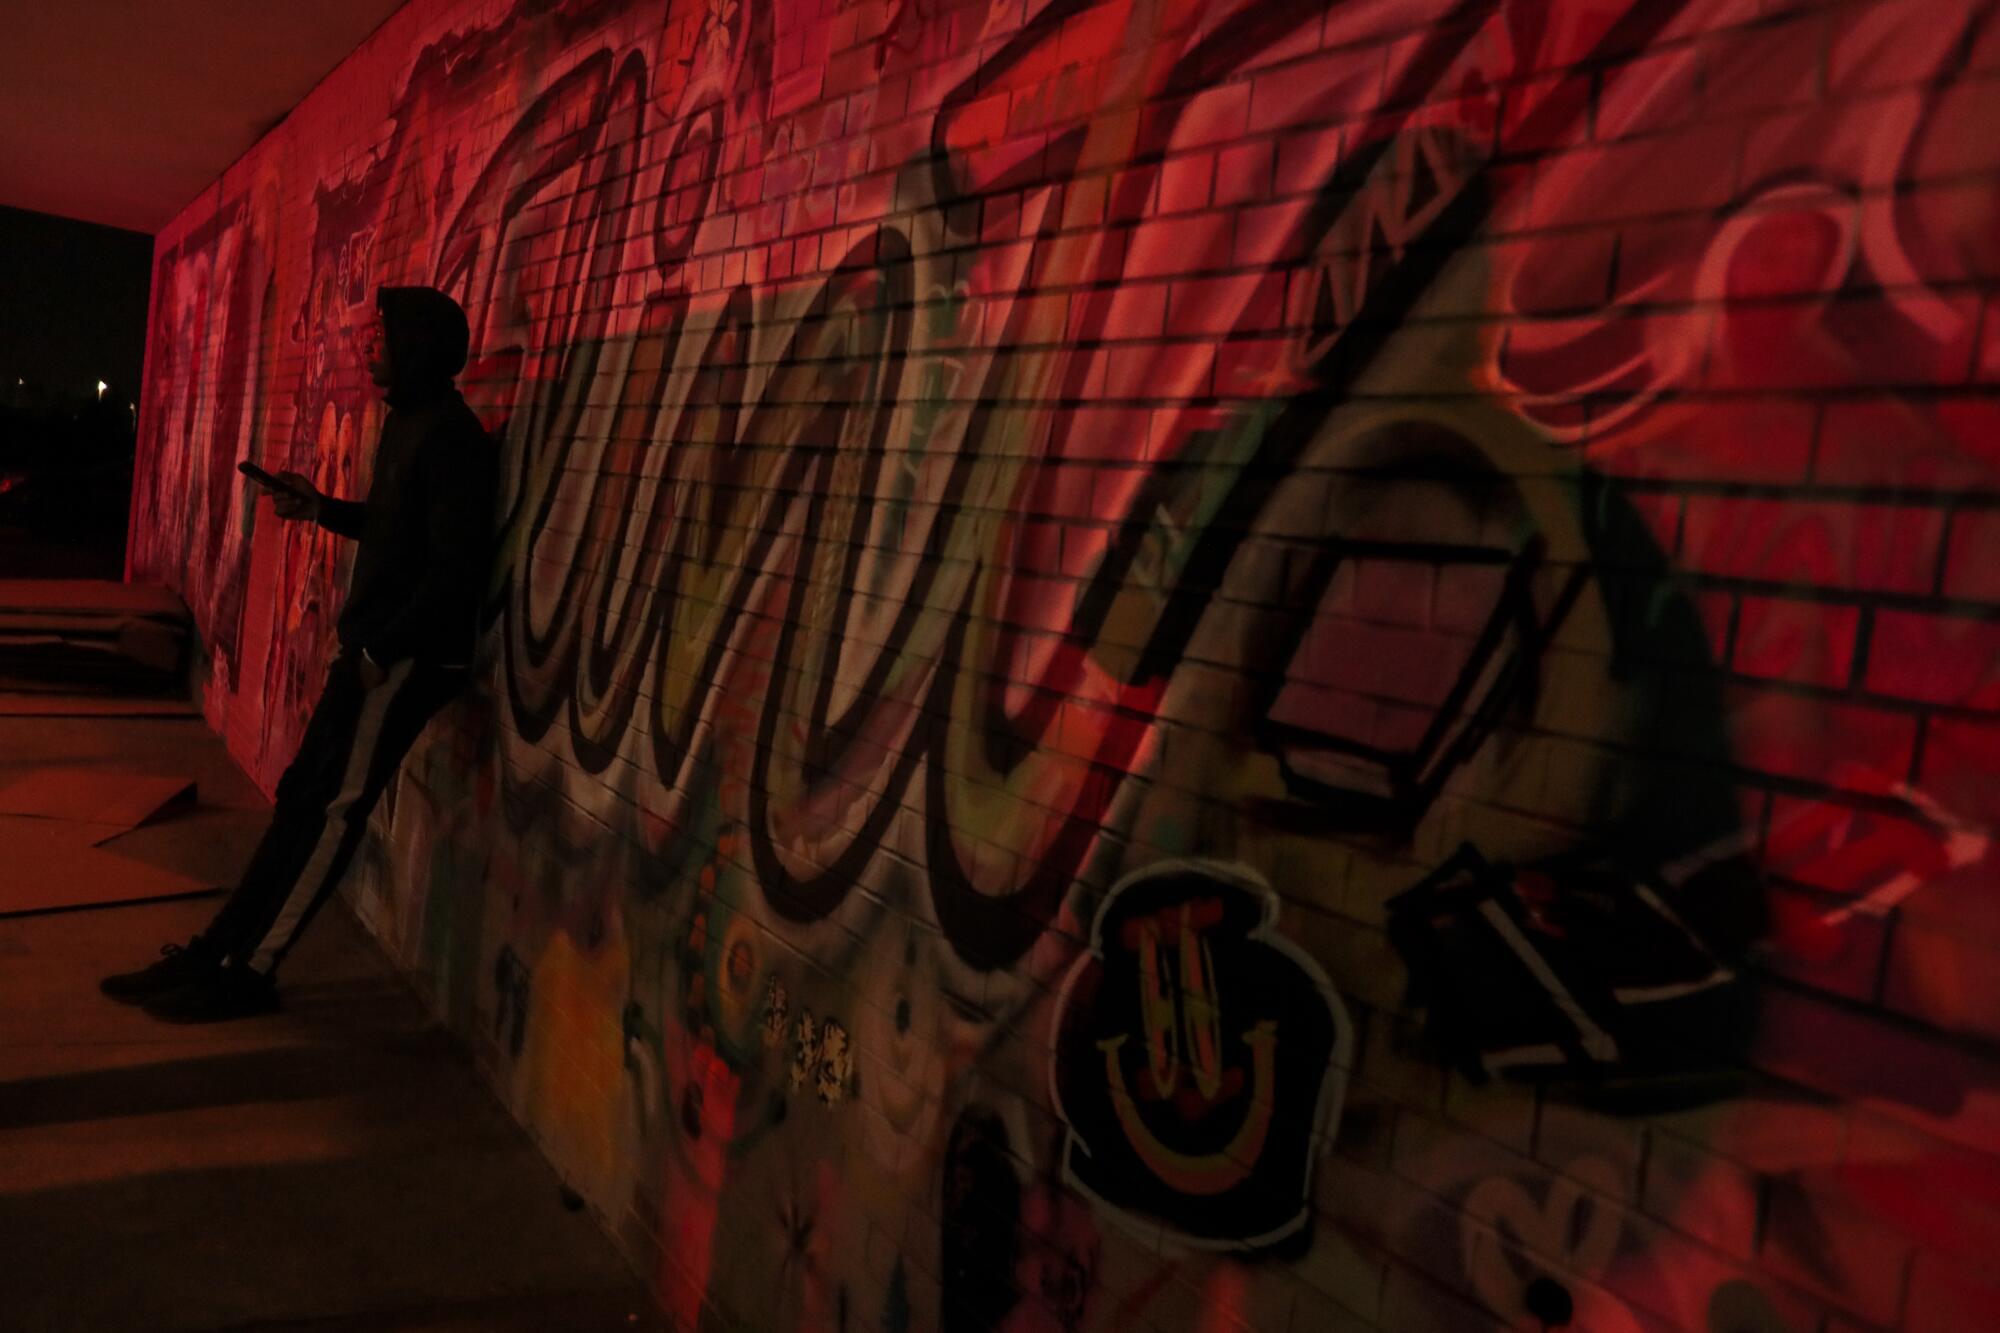 A student checks his phone as red and blue lights from a police vehicle reflect off a wall.